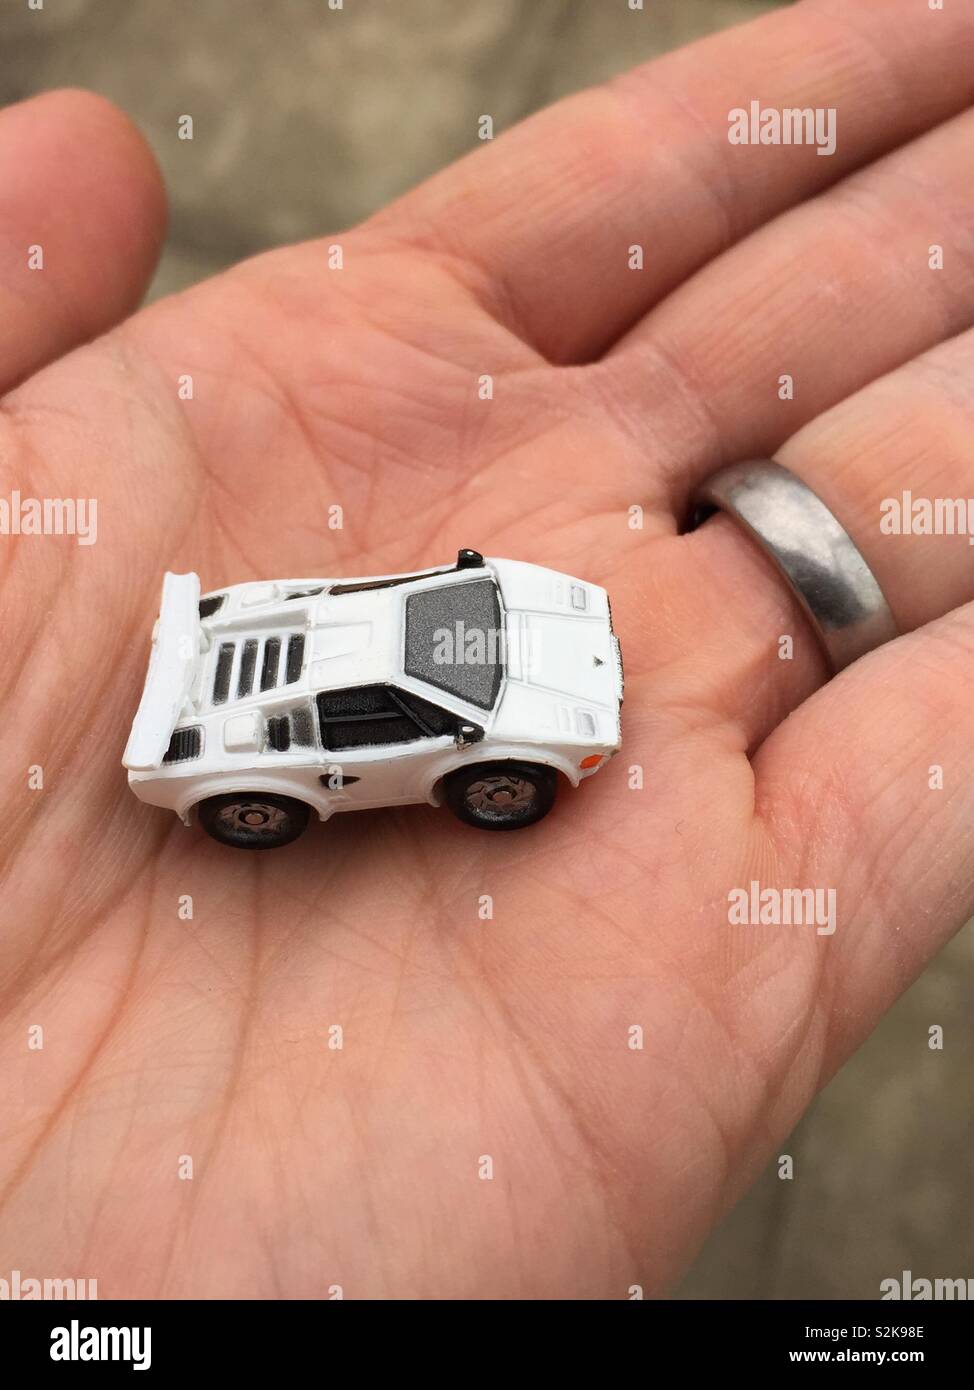 https://c8.alamy.com/comp/S2K98E/miniature-lamborghini-toy-car-in-the-palm-of-a-hand-world-in-your-palm-holding-a-dream-and-metaphor-for-wealth-or-riches-hot-wheels-S2K98E.jpg